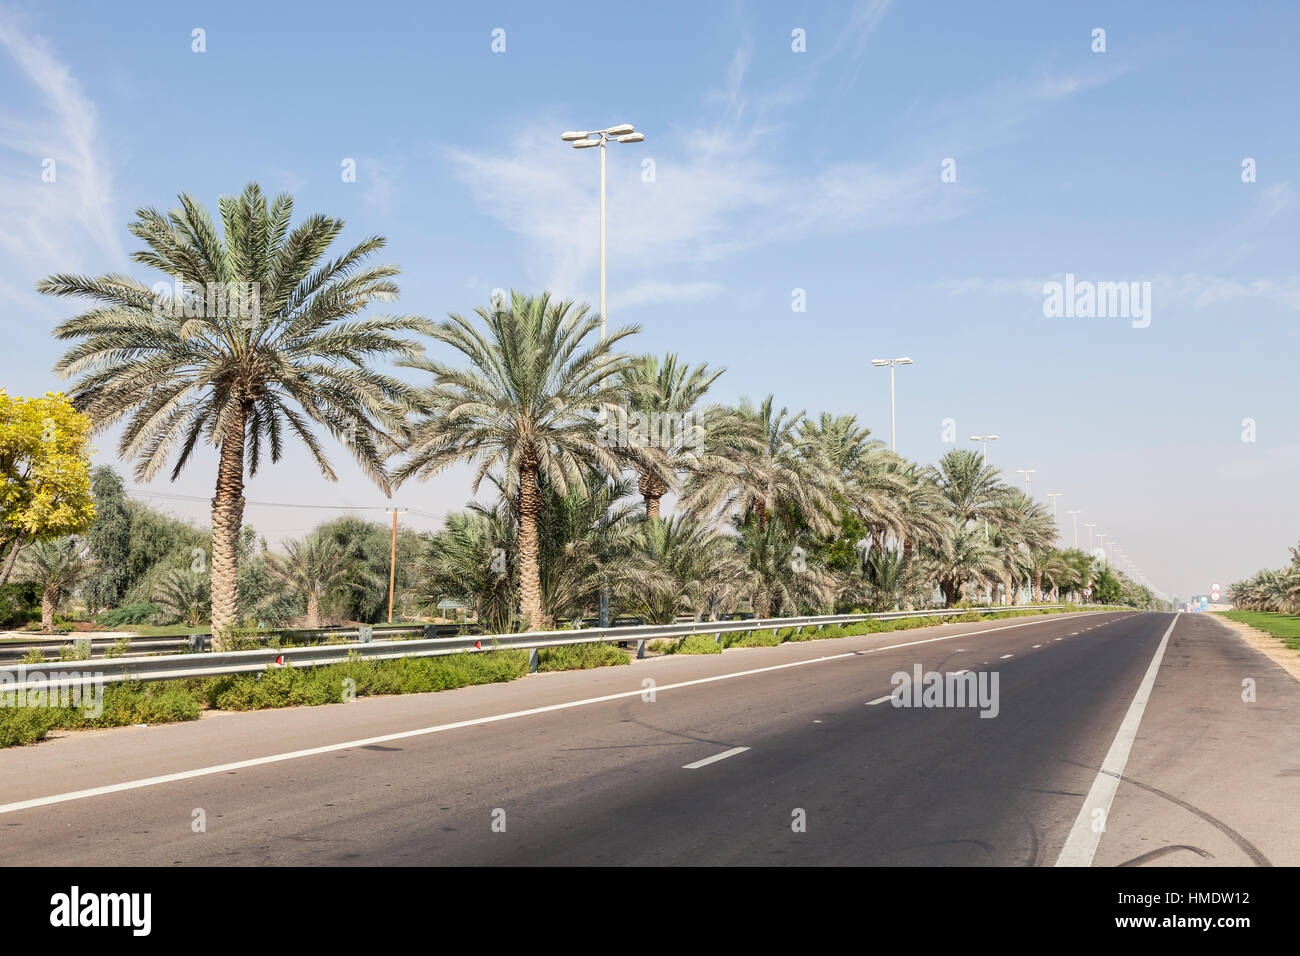 Street with palm trees in the desert town Mezairaa, UAE Stock Photo